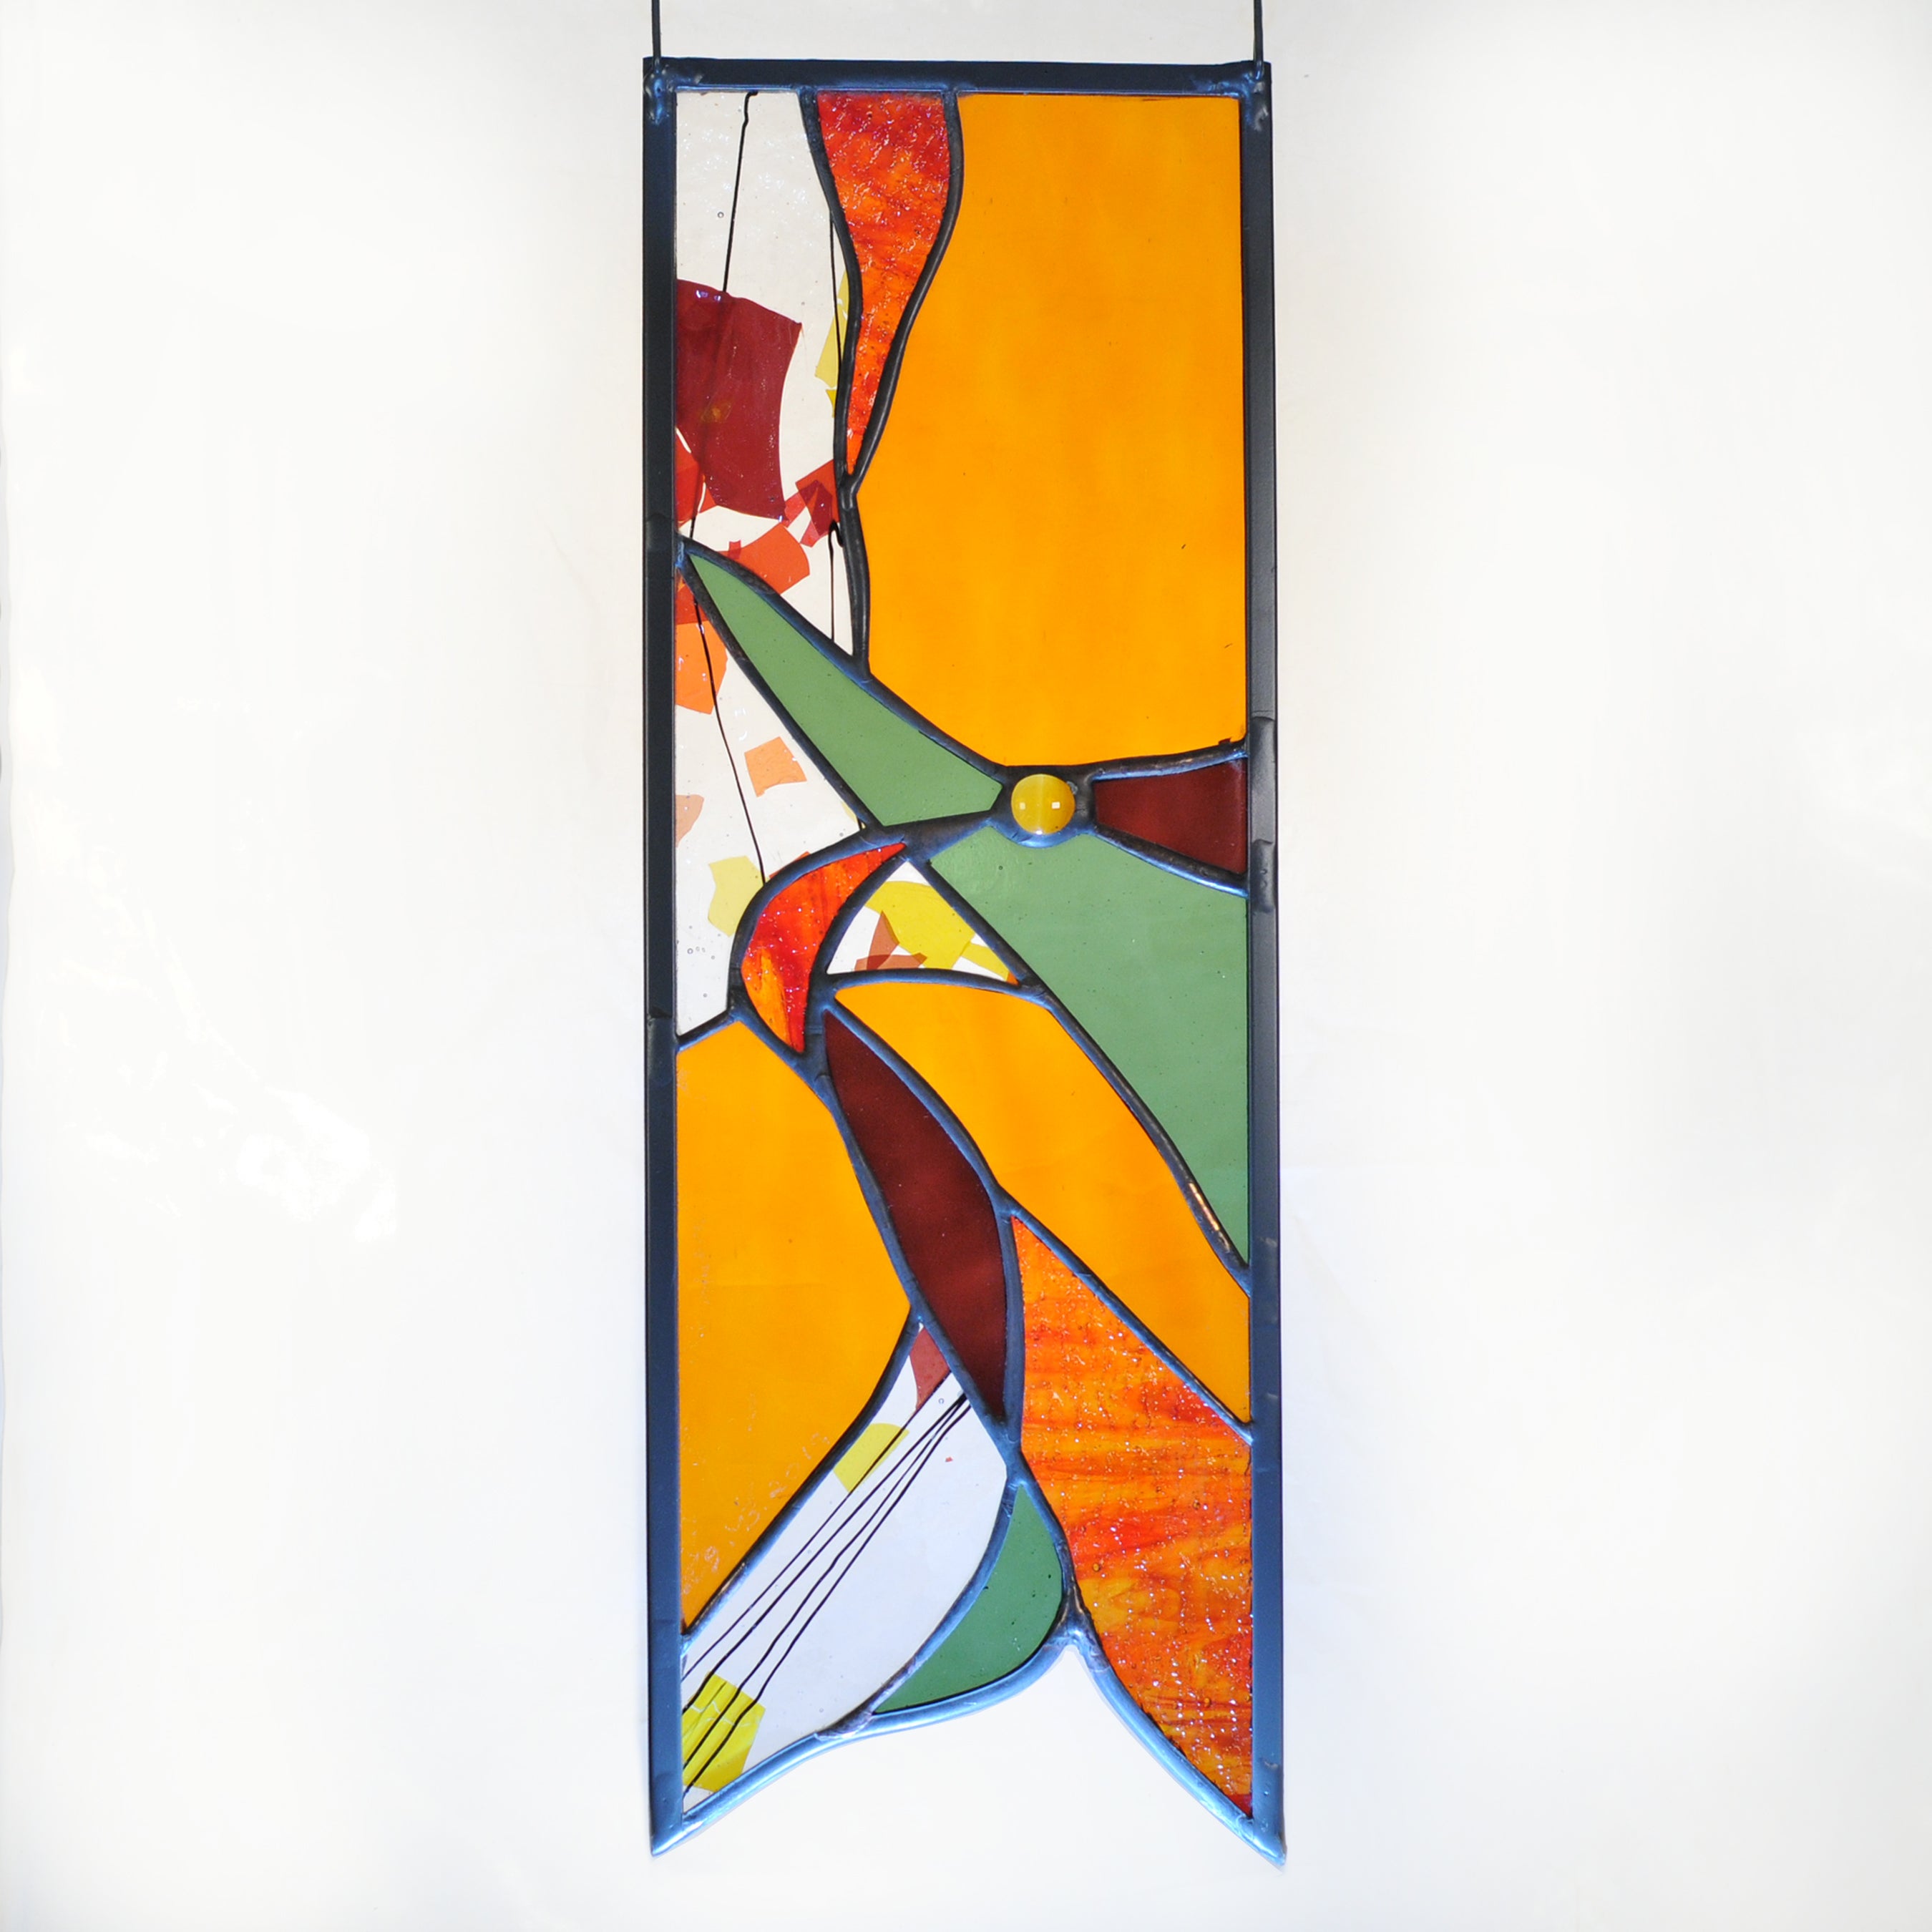 Small stained glass panel with autumn colors and organic swirls made by Vermont artist Julia Brandis.